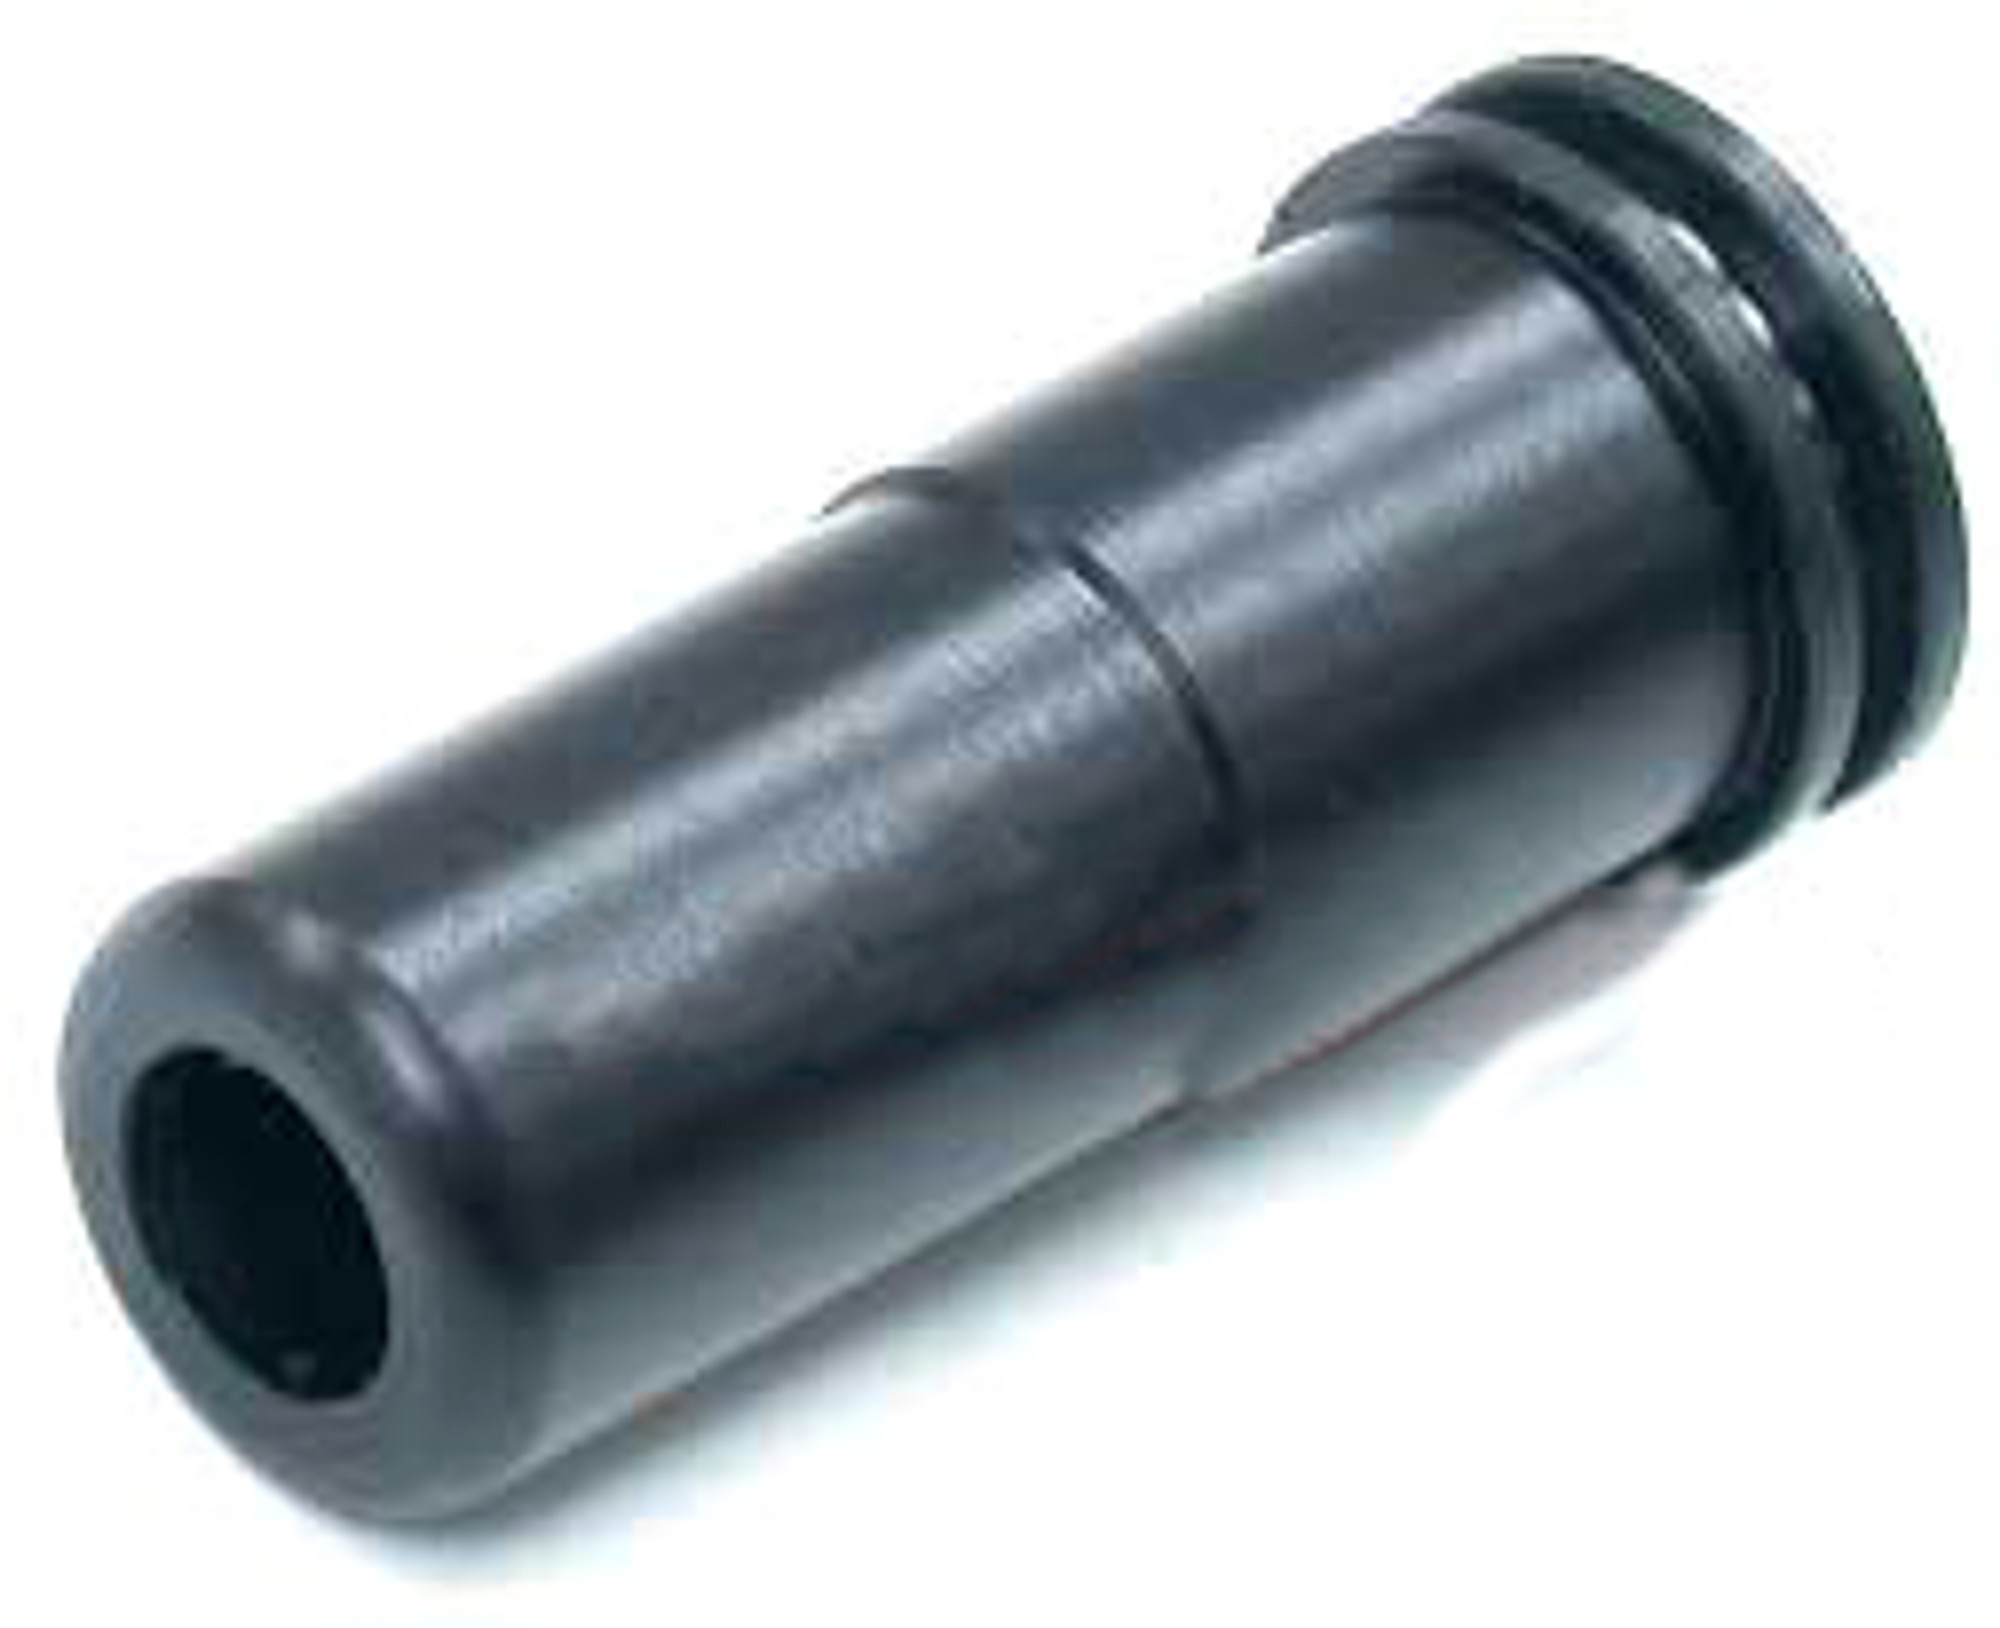 Guarder Bore-Up Air Seal Nozzle For G3 / T3 Series Airsoft AEG